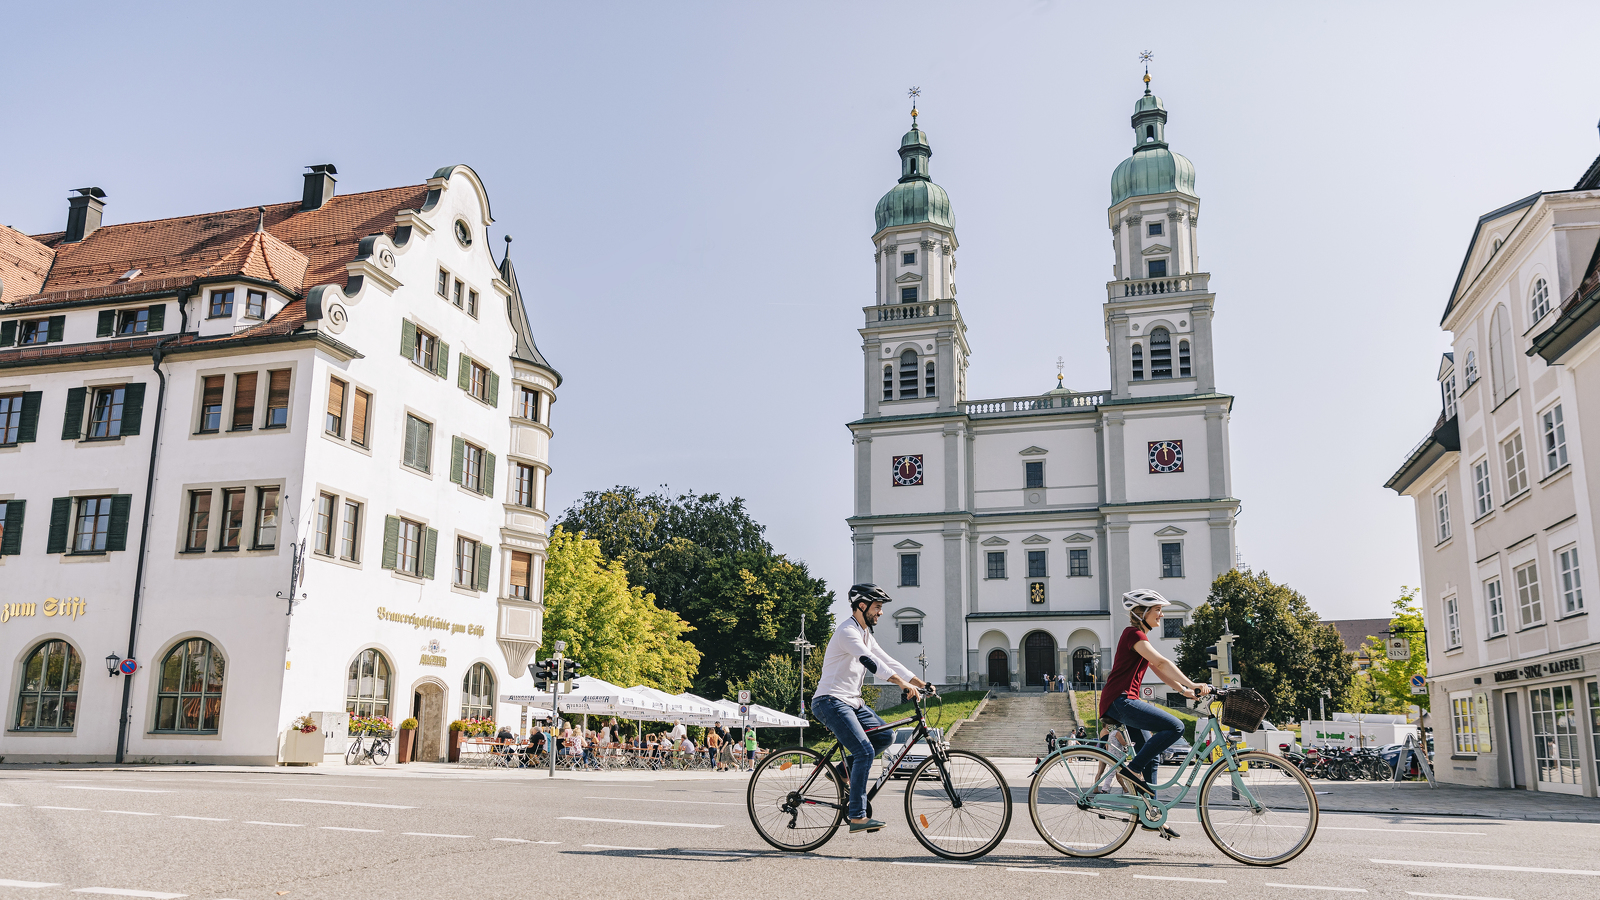 Two cyclists in front of the Stiftsplatz in Kempten